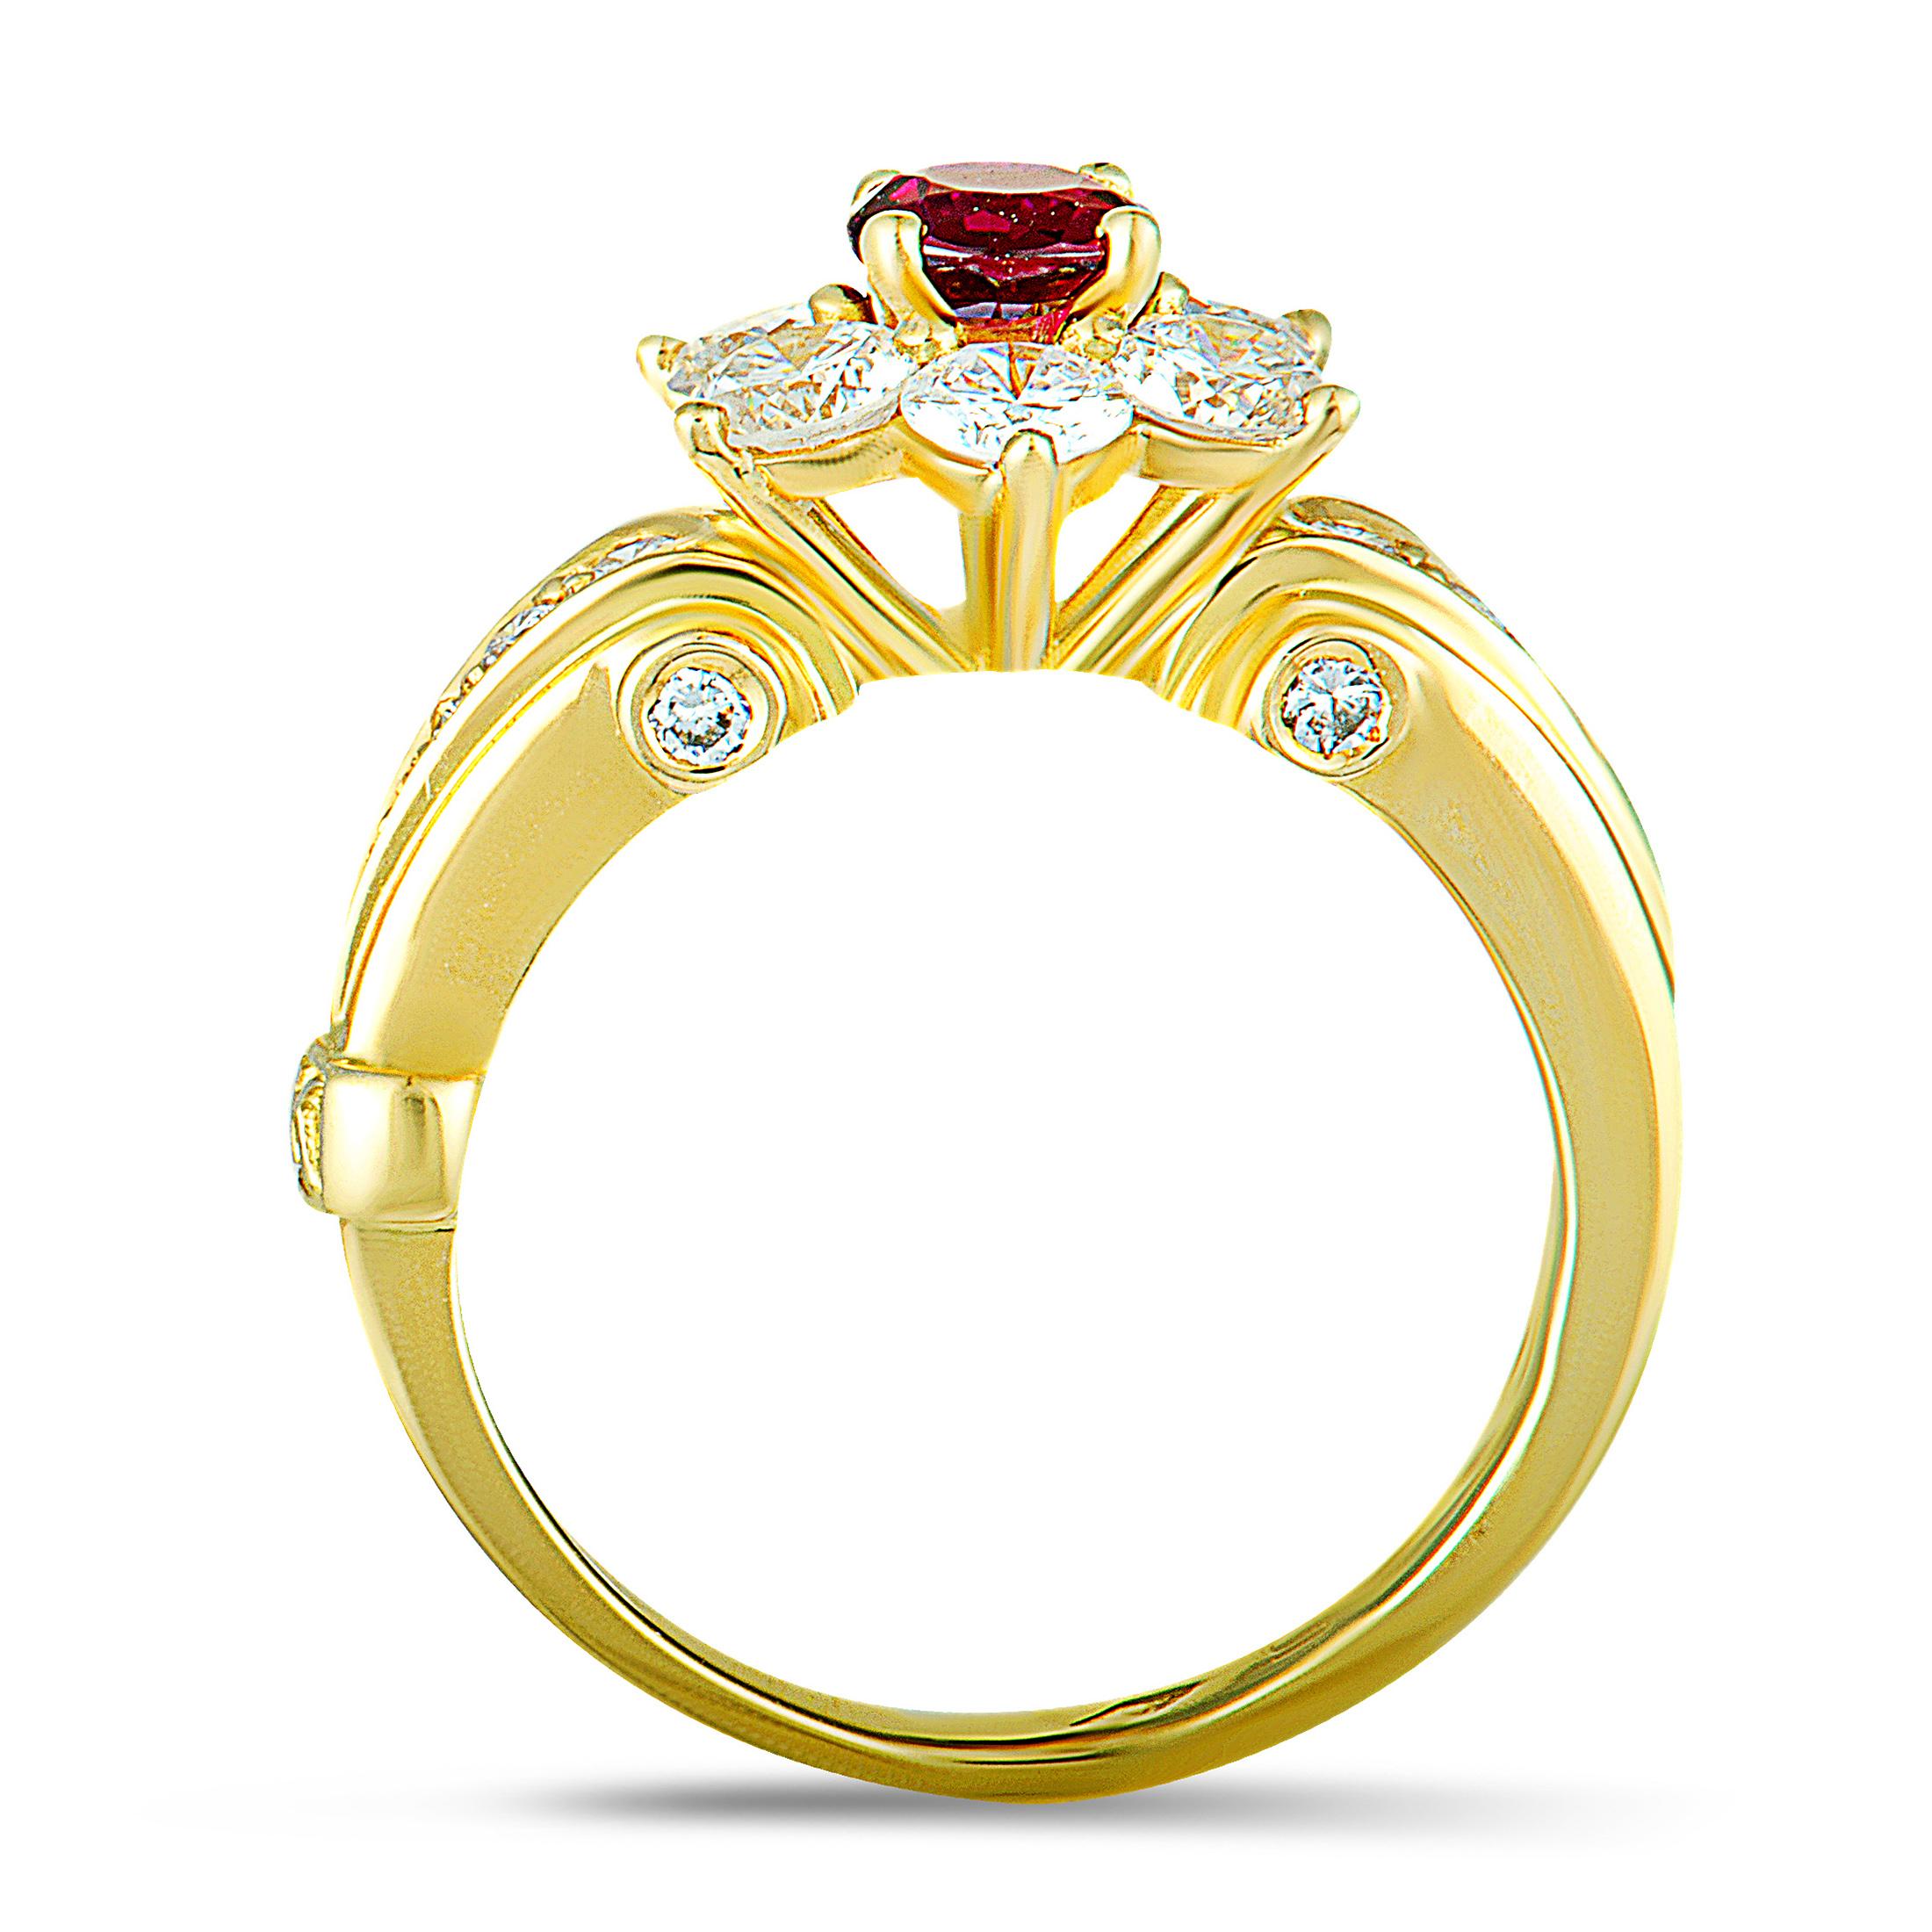 An endearingly classic design is beautifully topped off with magnificent gems in this fascinating ring from Korloff that is expertly crafted from luxurious 18K yellow gold. The ring is set with a stunning ruby that weighs 0.45 carats, and with